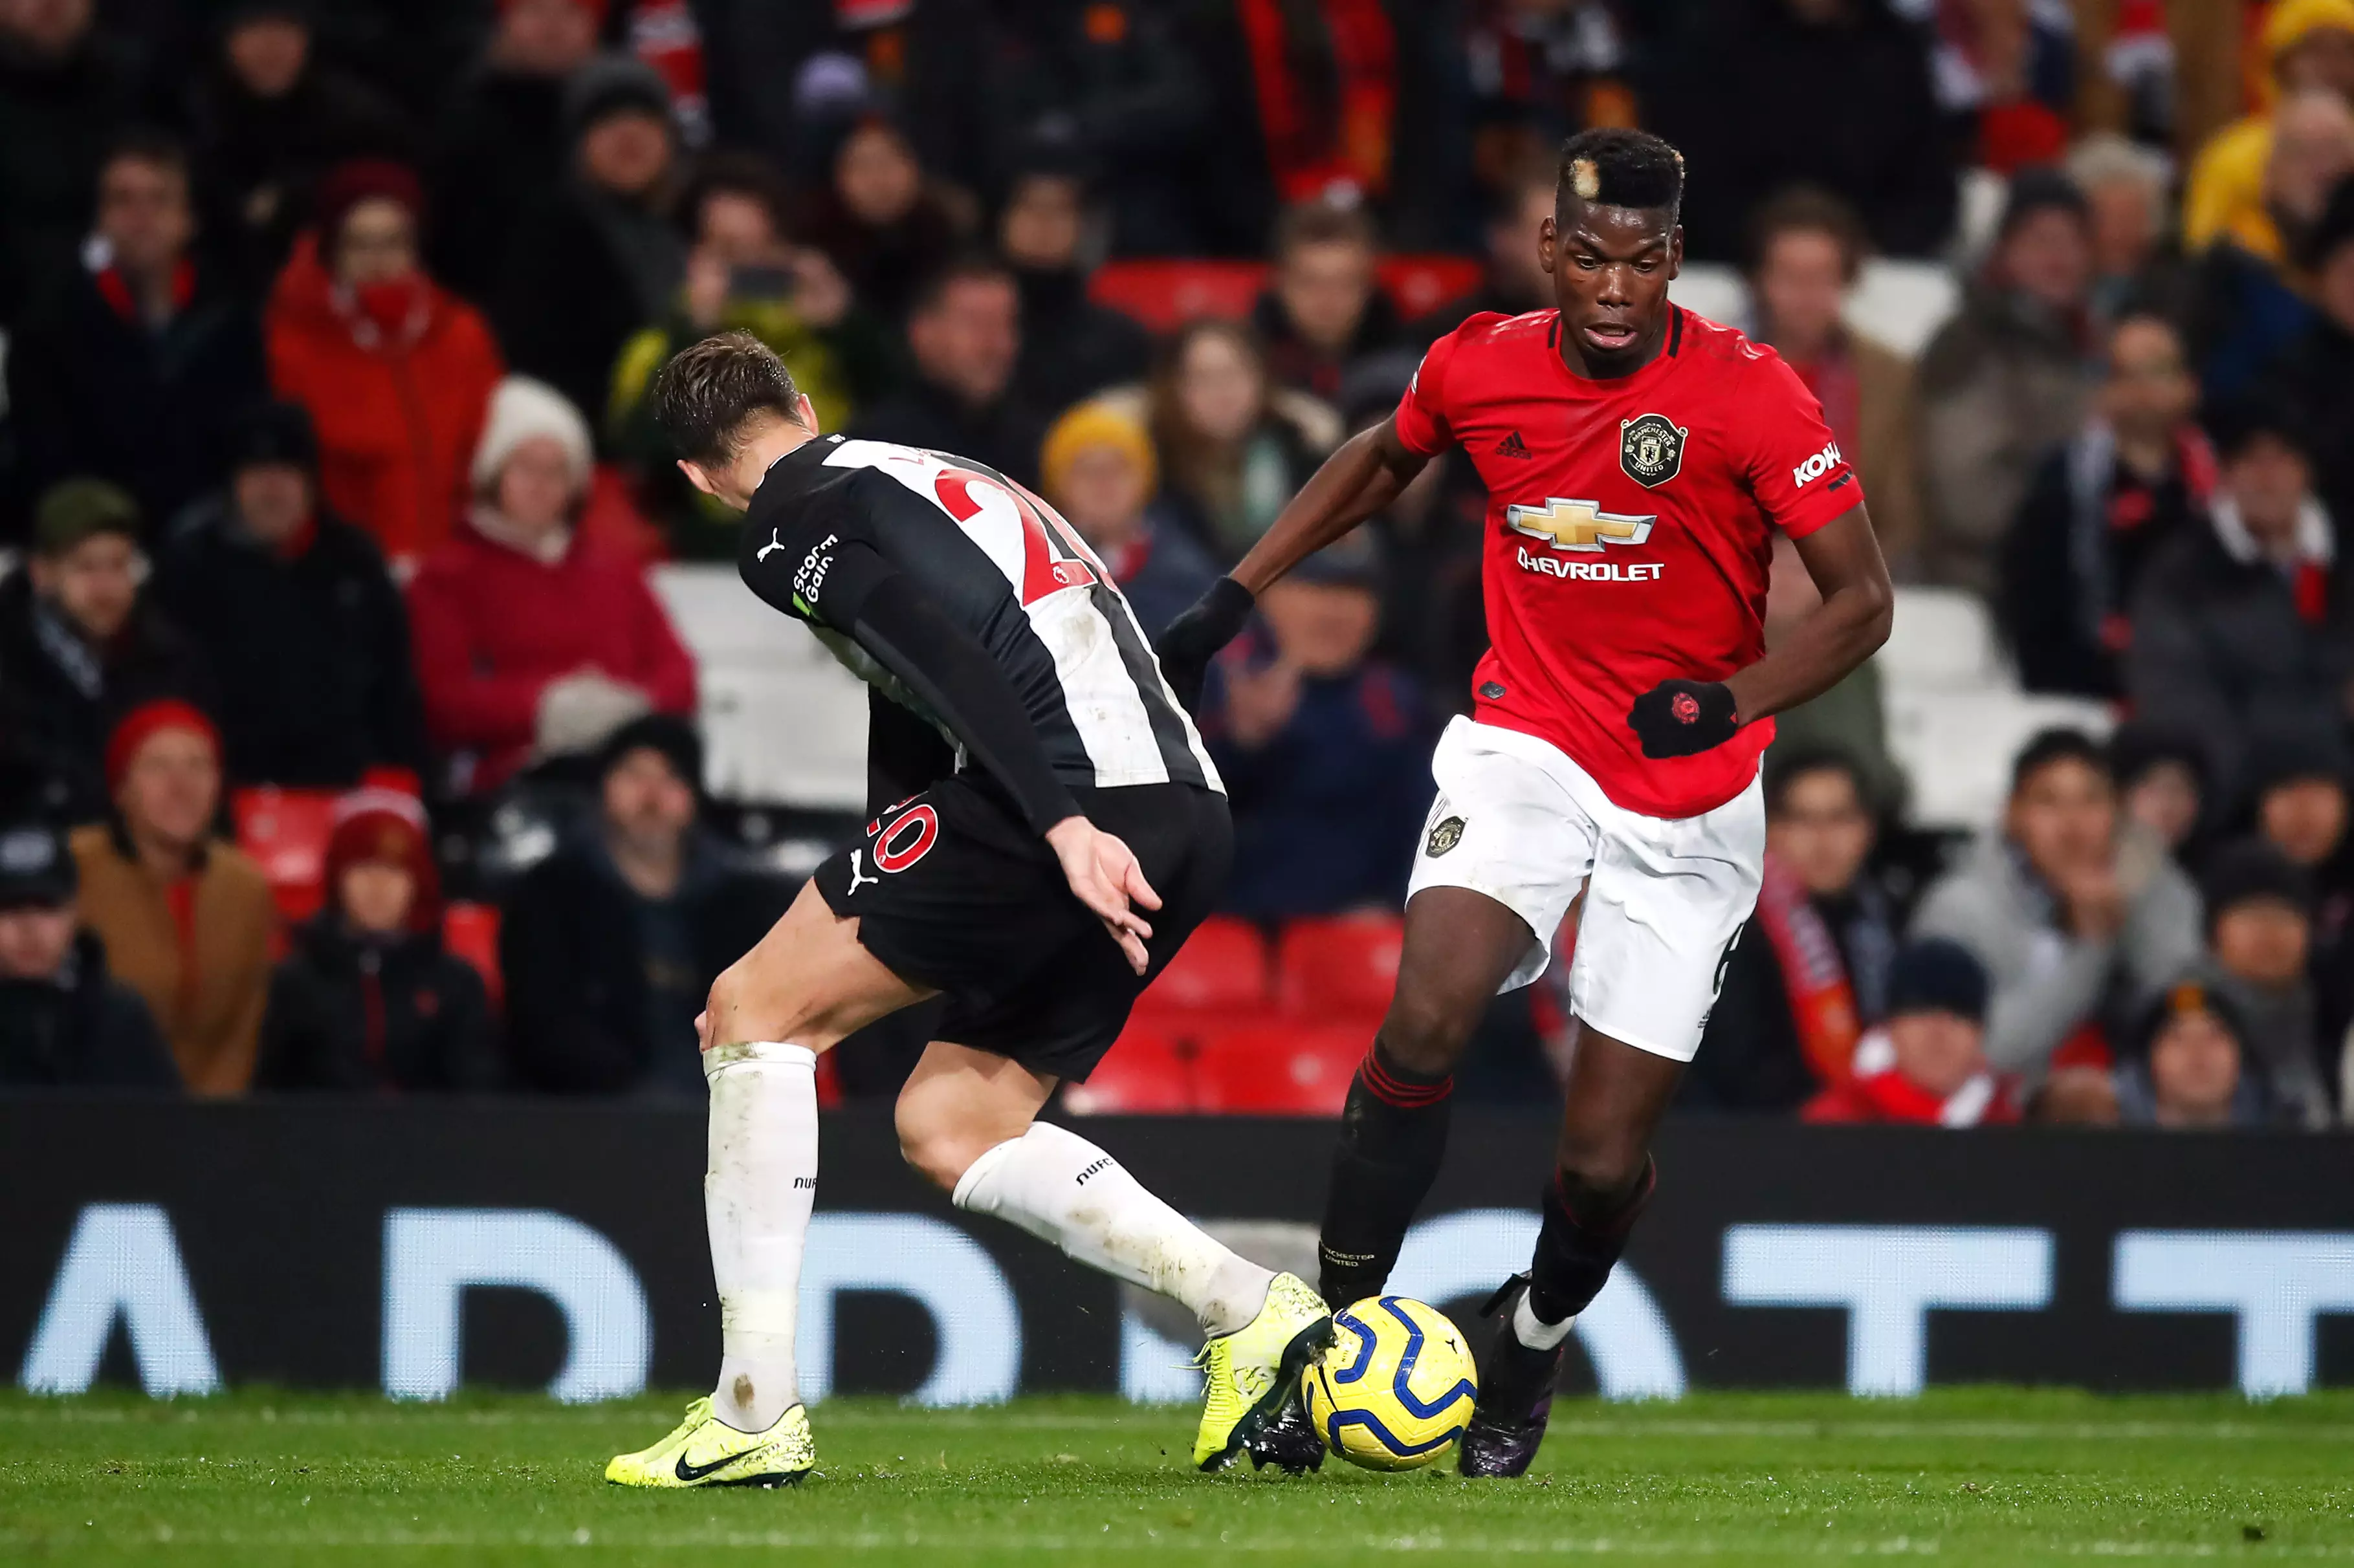 Pogba played in the win against Newcastle United but it's one of only a few matches. Image: PA Images